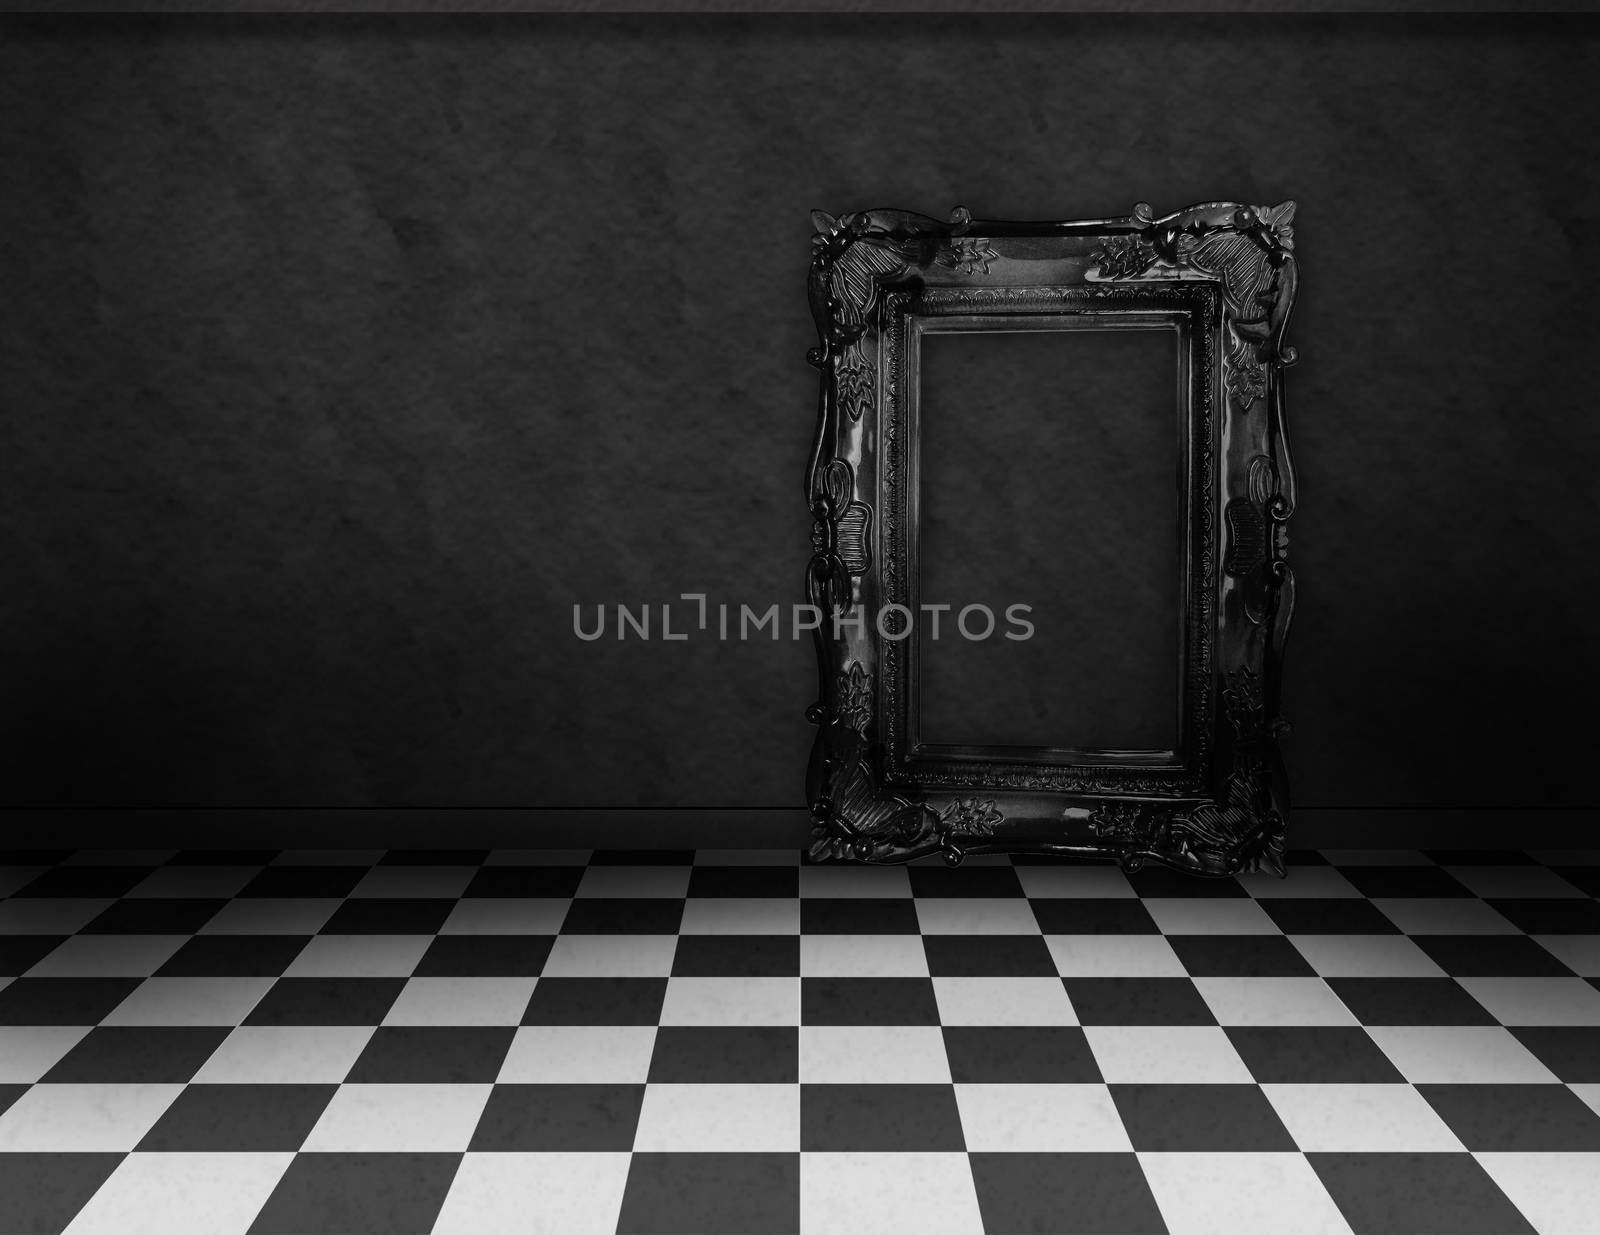 Empty, dark, psychedelic room with black and white checker on the floor and empty black frame. Nightmare or dream, museum scene or art gallery.